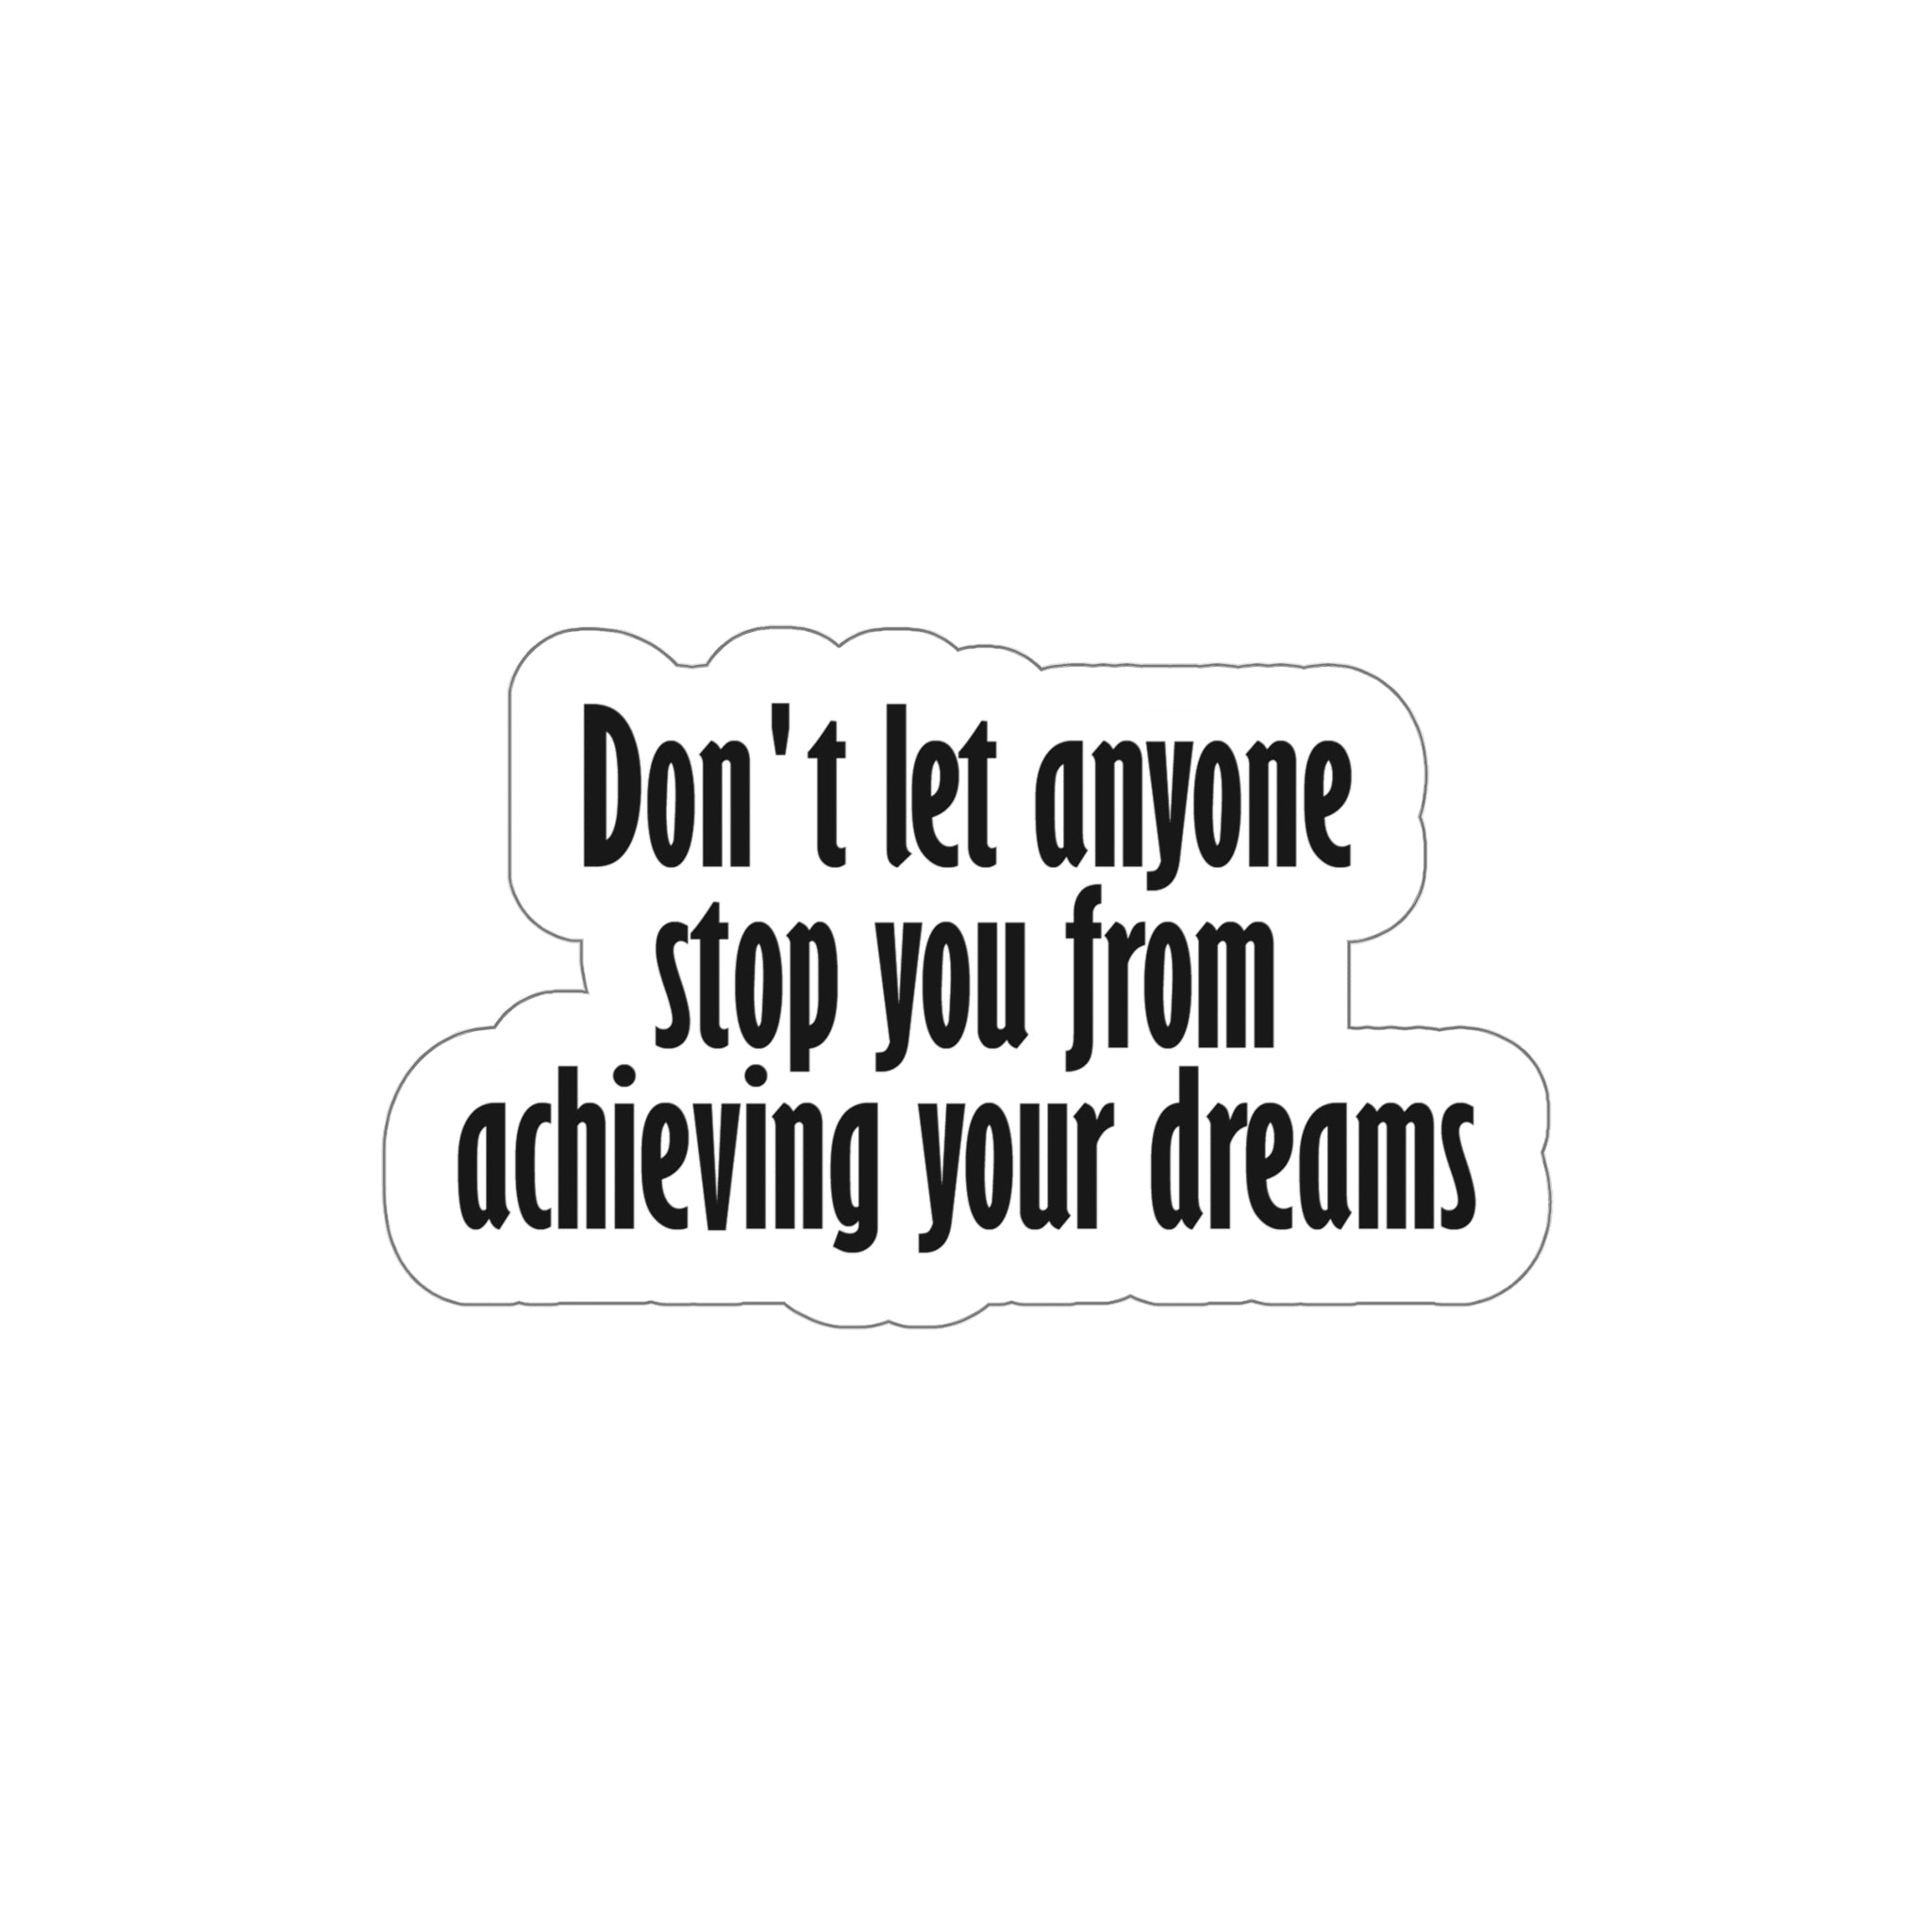 Reach Your Dreams - Get This Die-Cut Vinyl Sticker Today! #size_6x6-inches